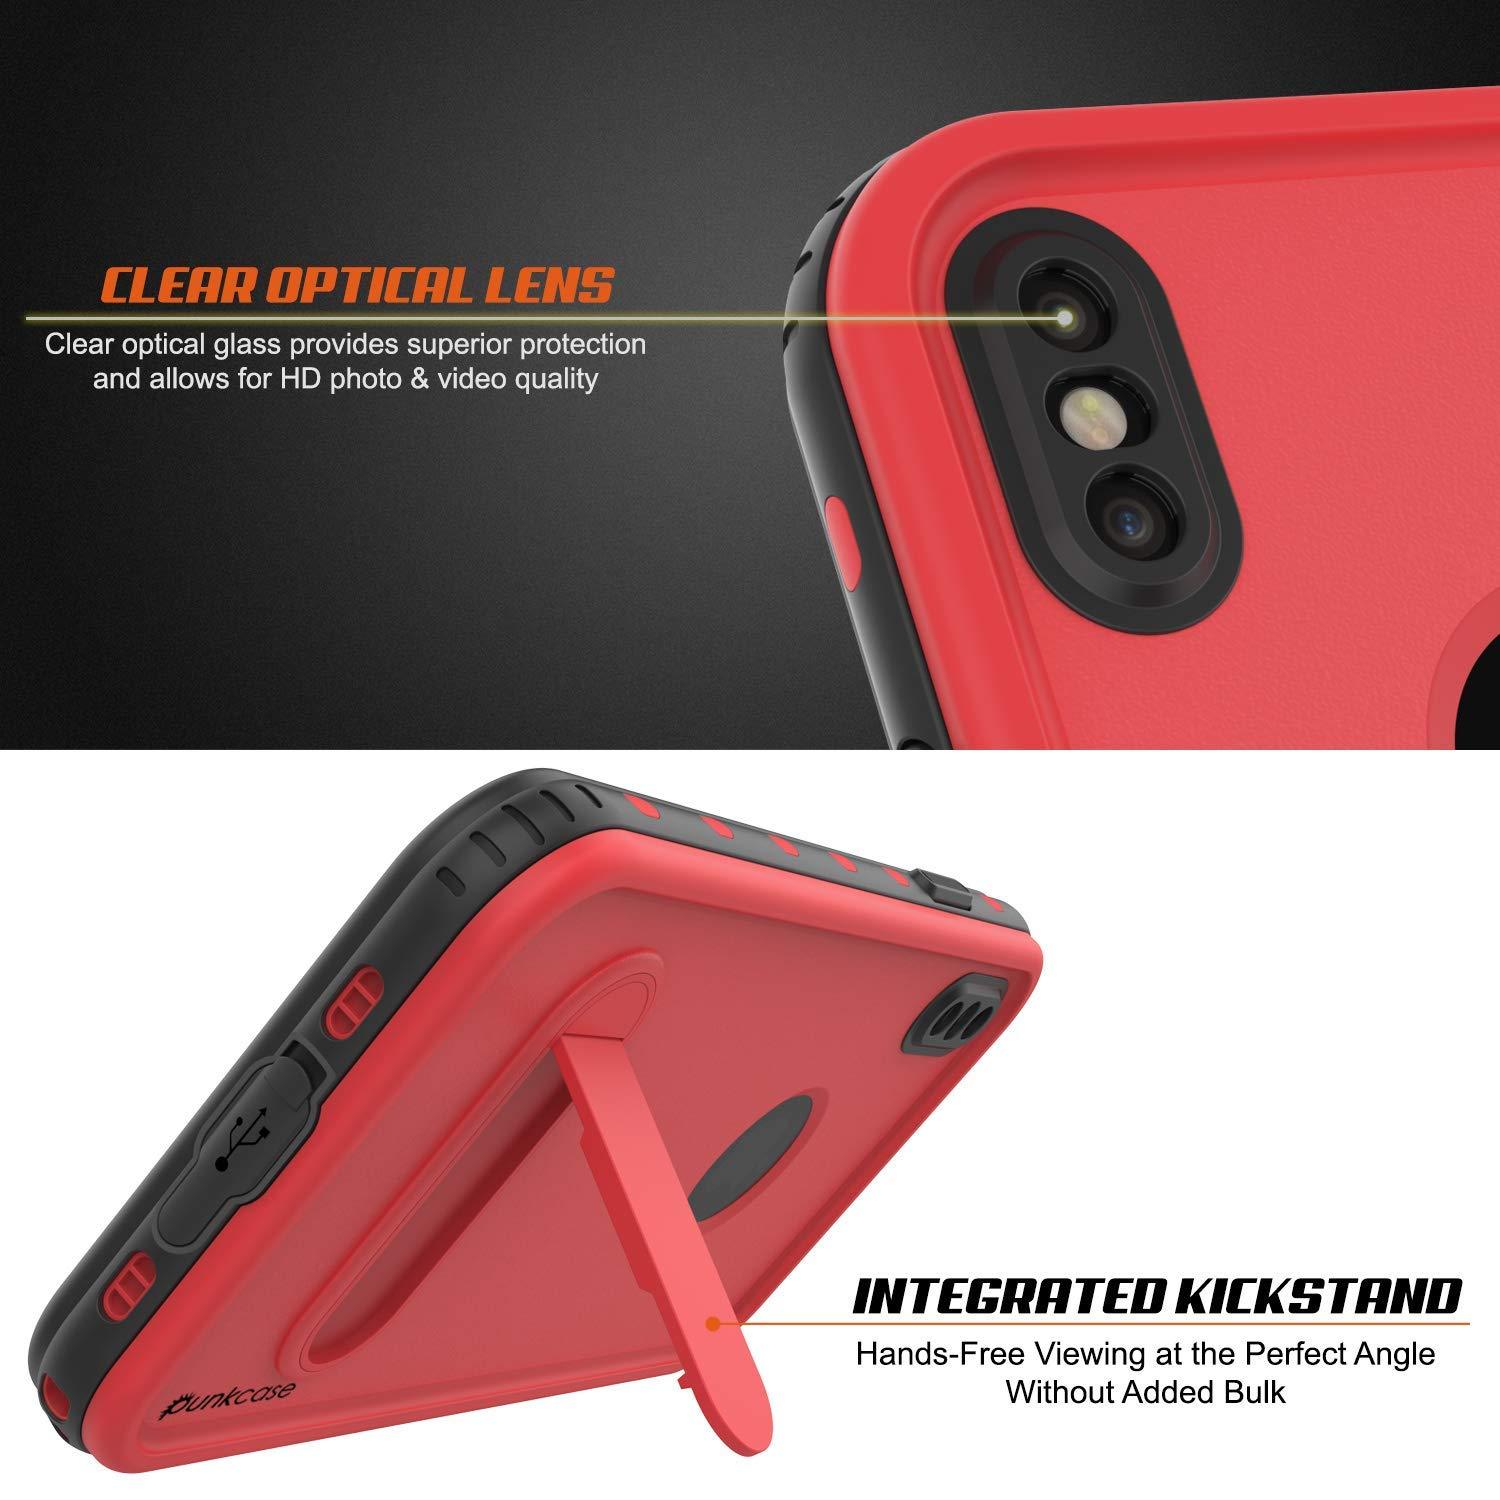 iPhone XS Max Waterproof Case, Punkcase [KickStud Series] Armor Cover [Red]